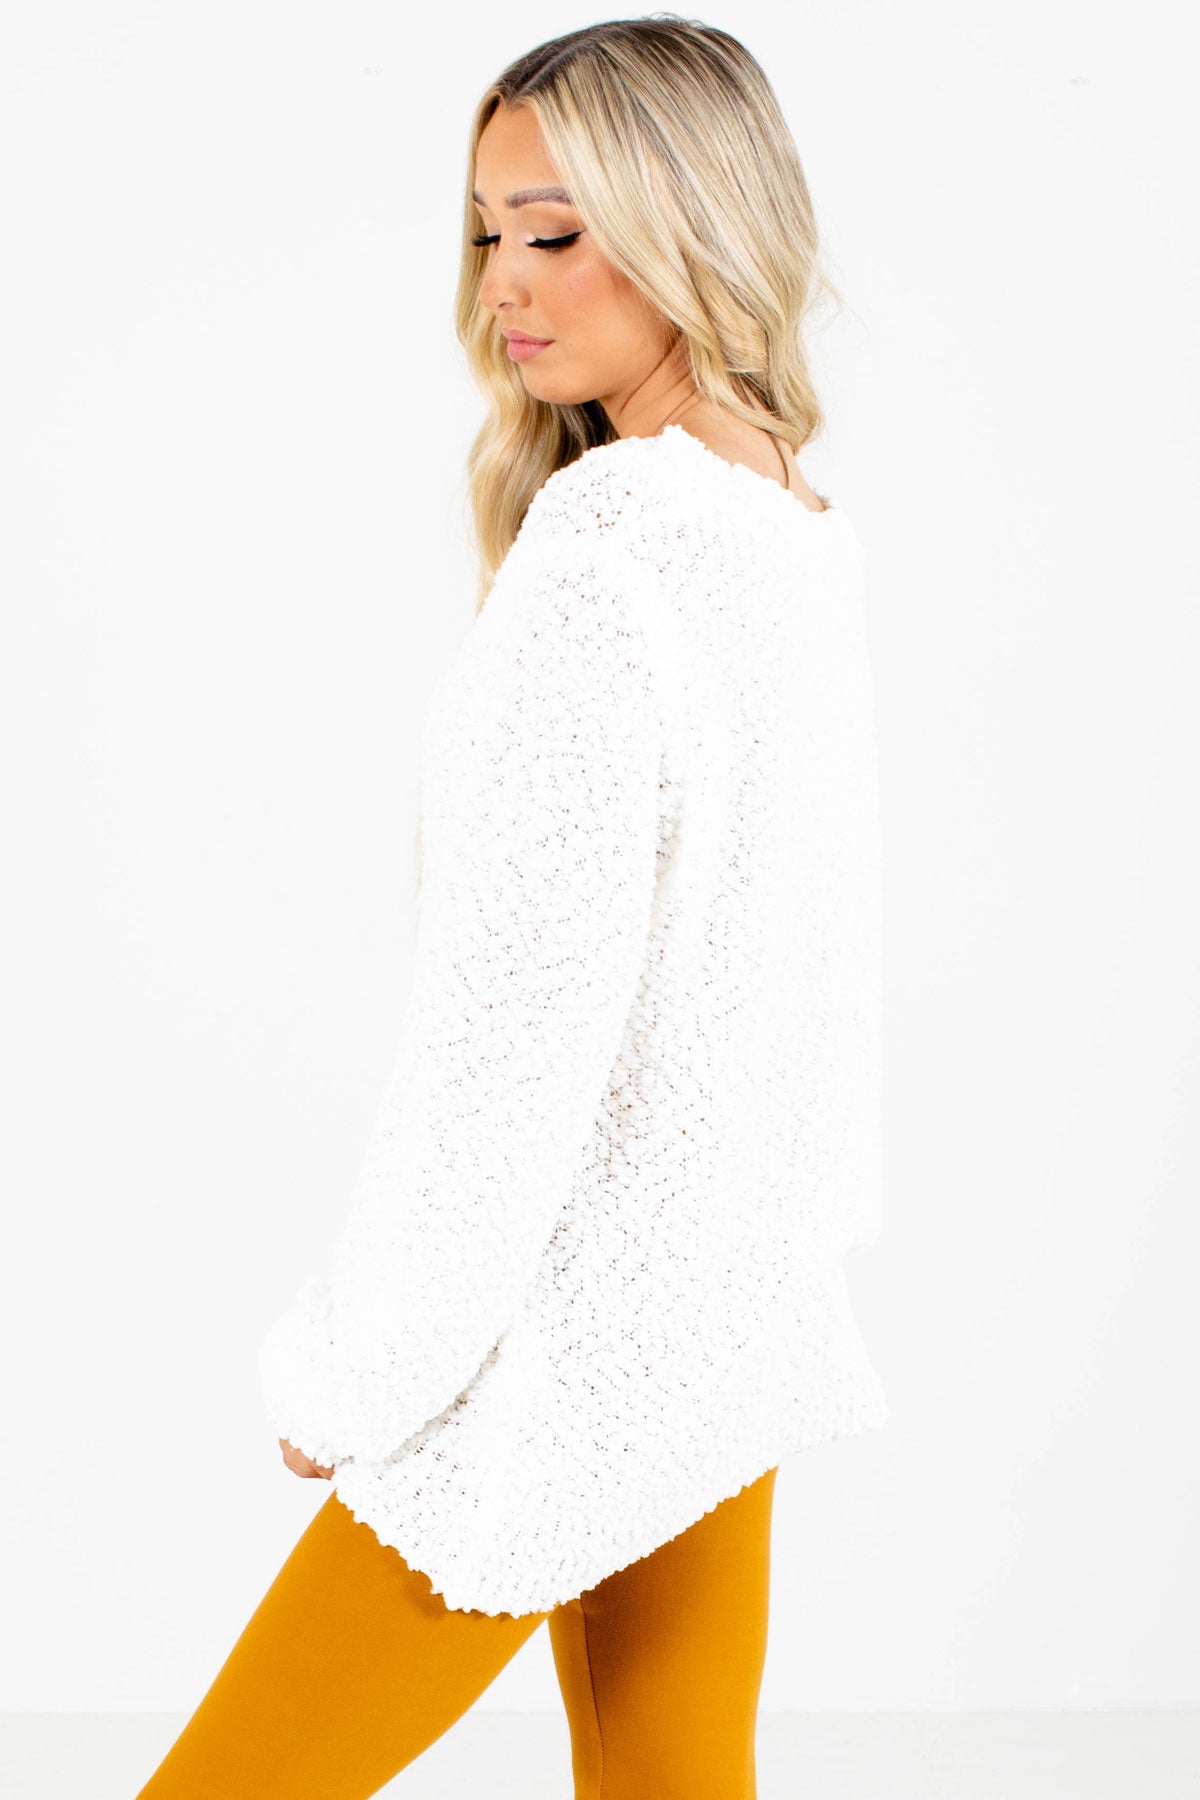 Women's White Warm and Cozy Boutique Sweater